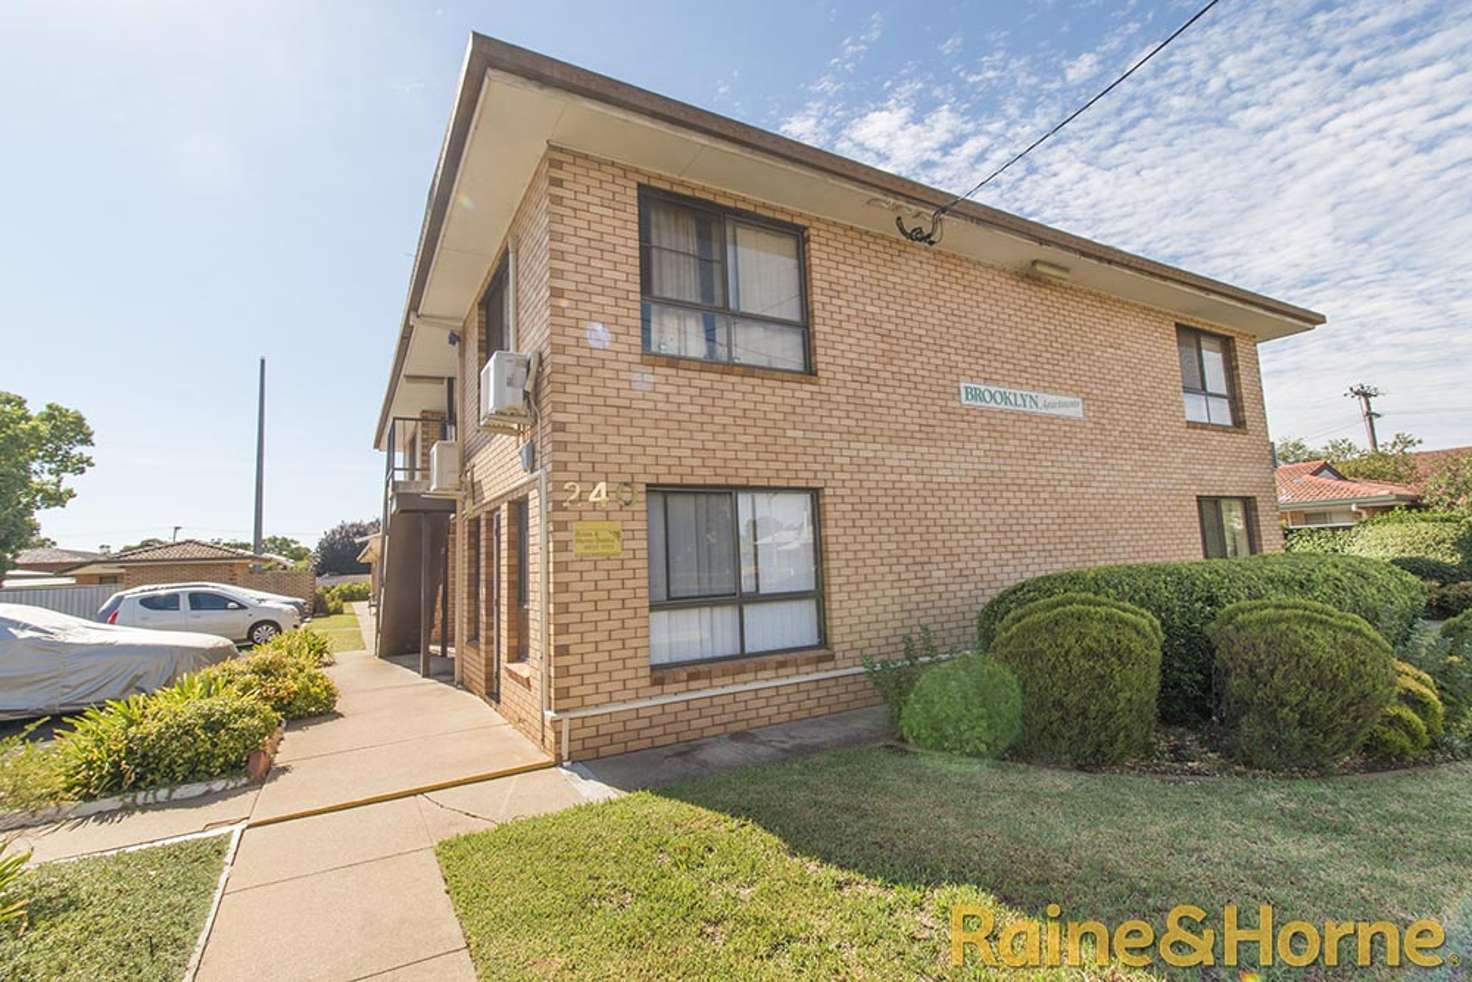 Main view of Homely other listing, 14/240 Brisbane St, Dubbo NSW 2830